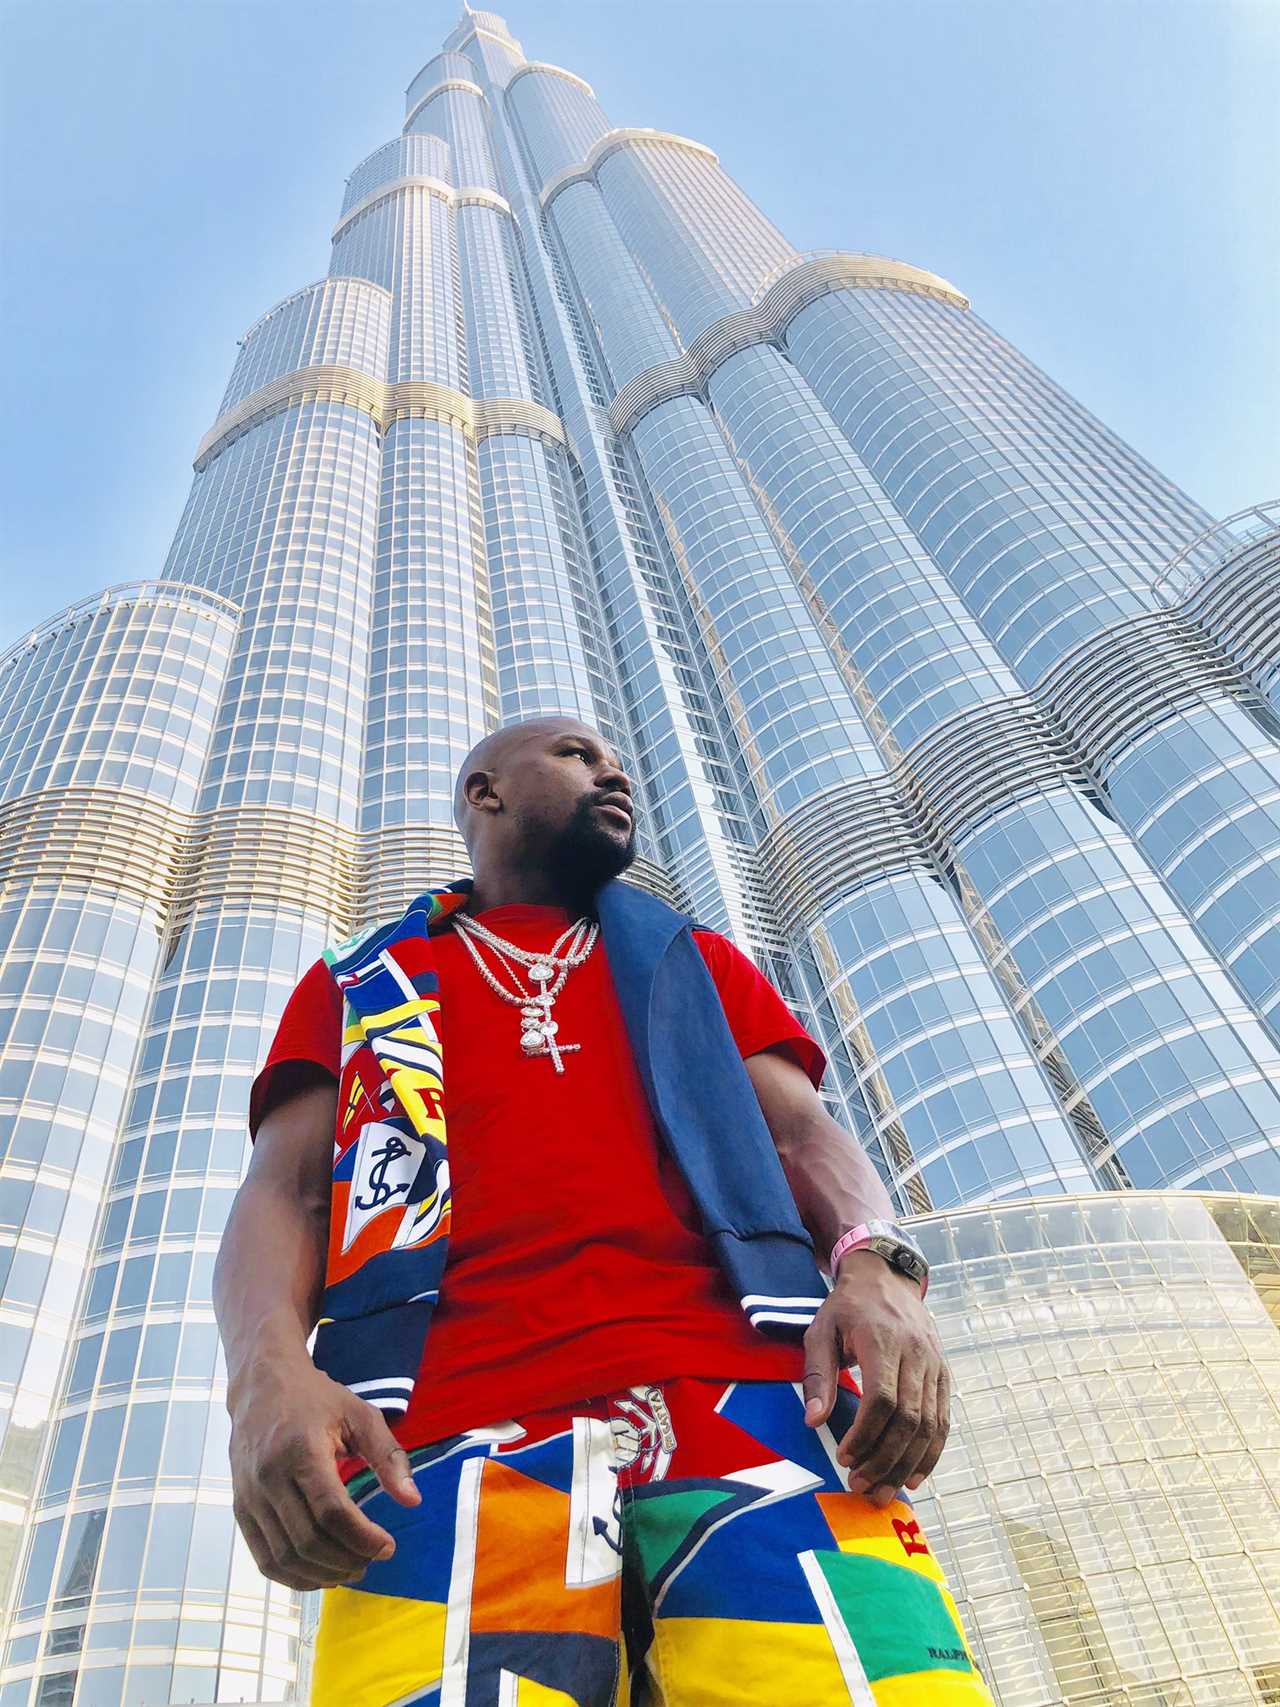 Floyd Mayweather, boxing legend, is building the TENTH skyscraper. He boasts a $50,000-per-month investment